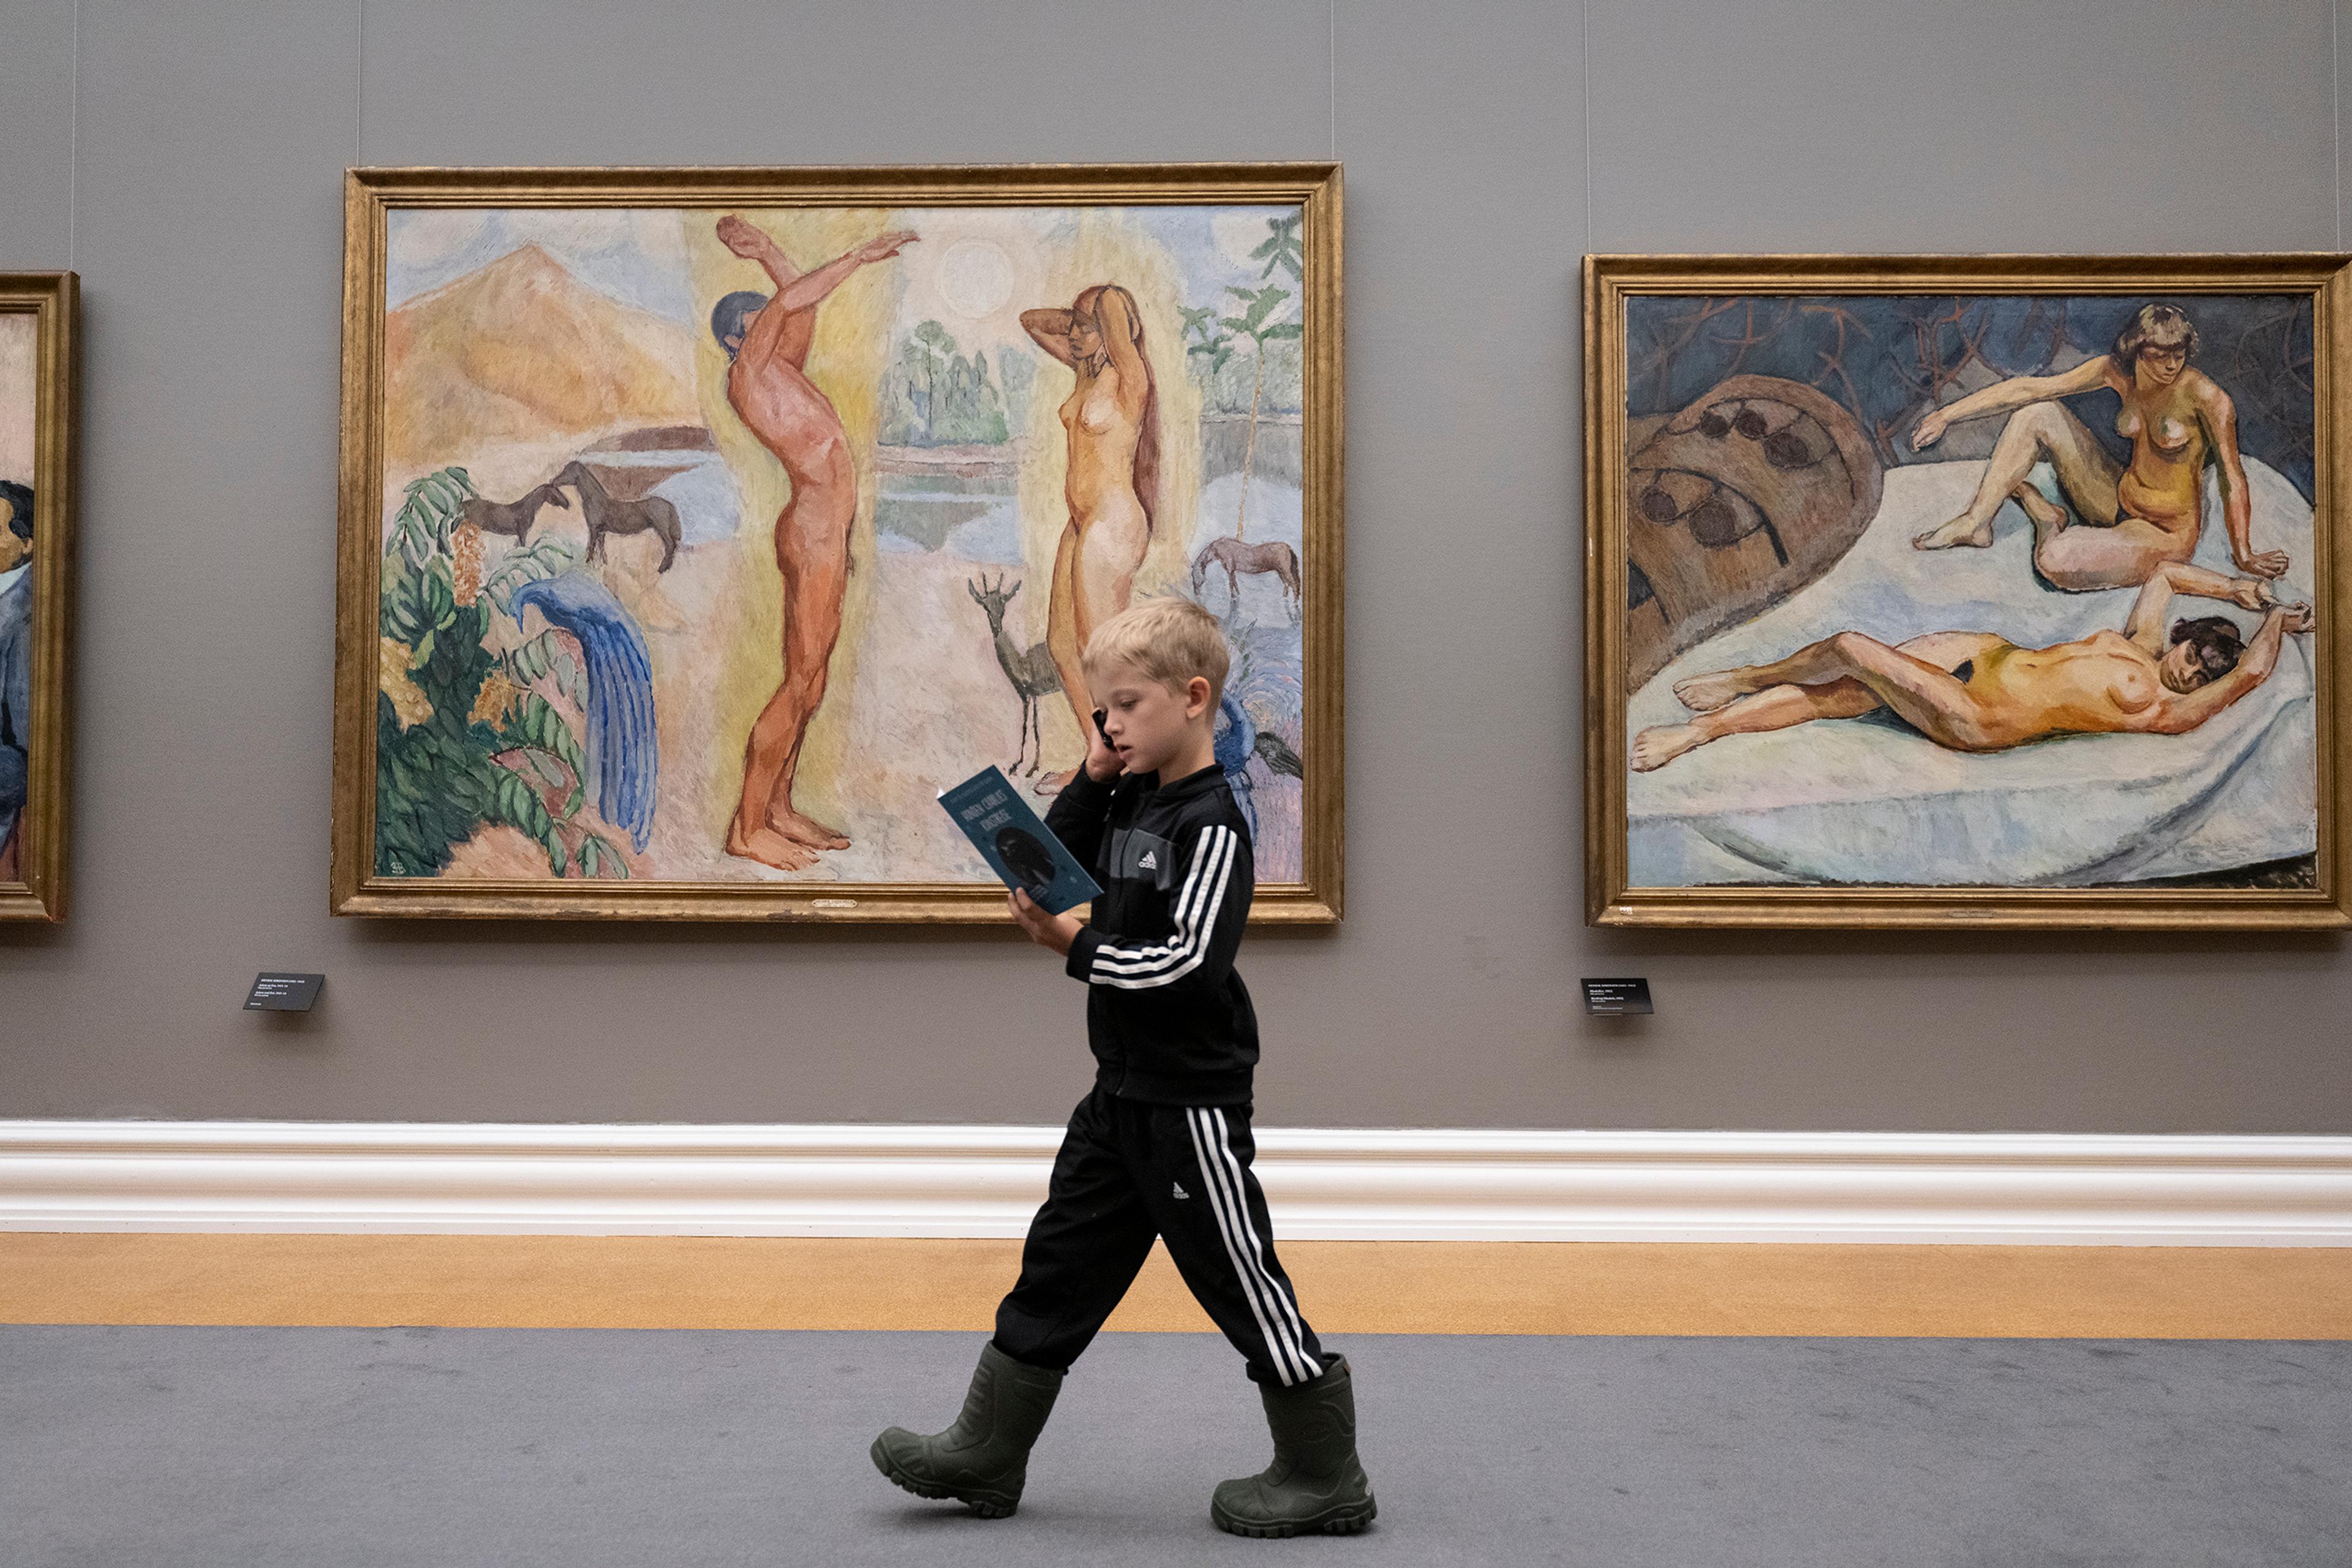 A boy is walking in front of a large painting, listening to an audio guide